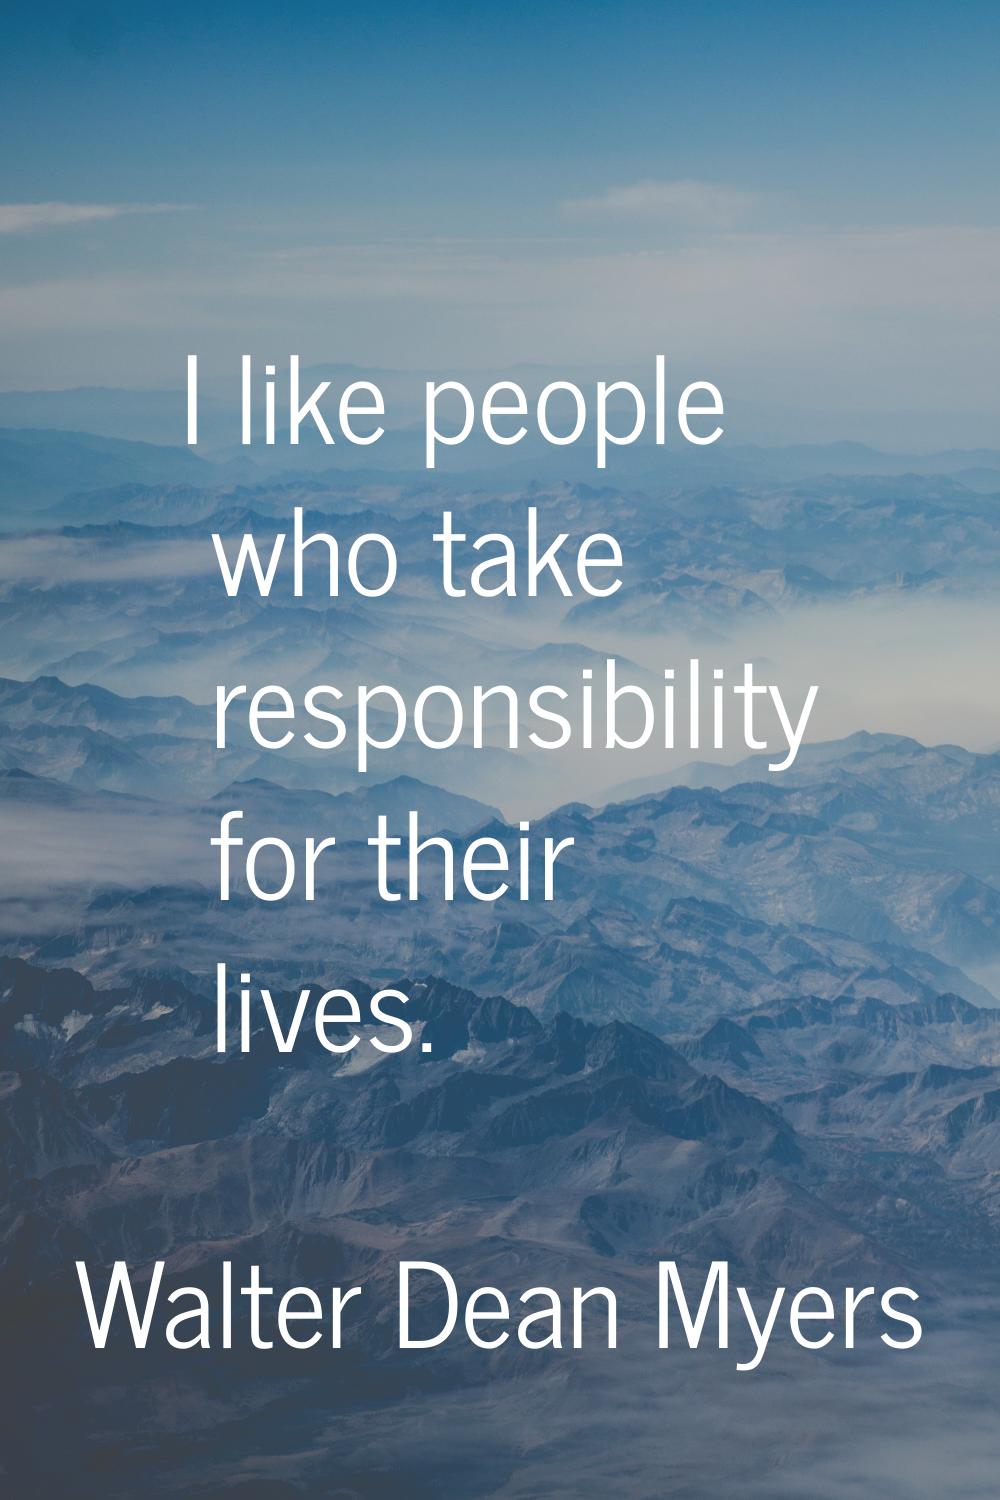 I like people who take responsibility for their lives.